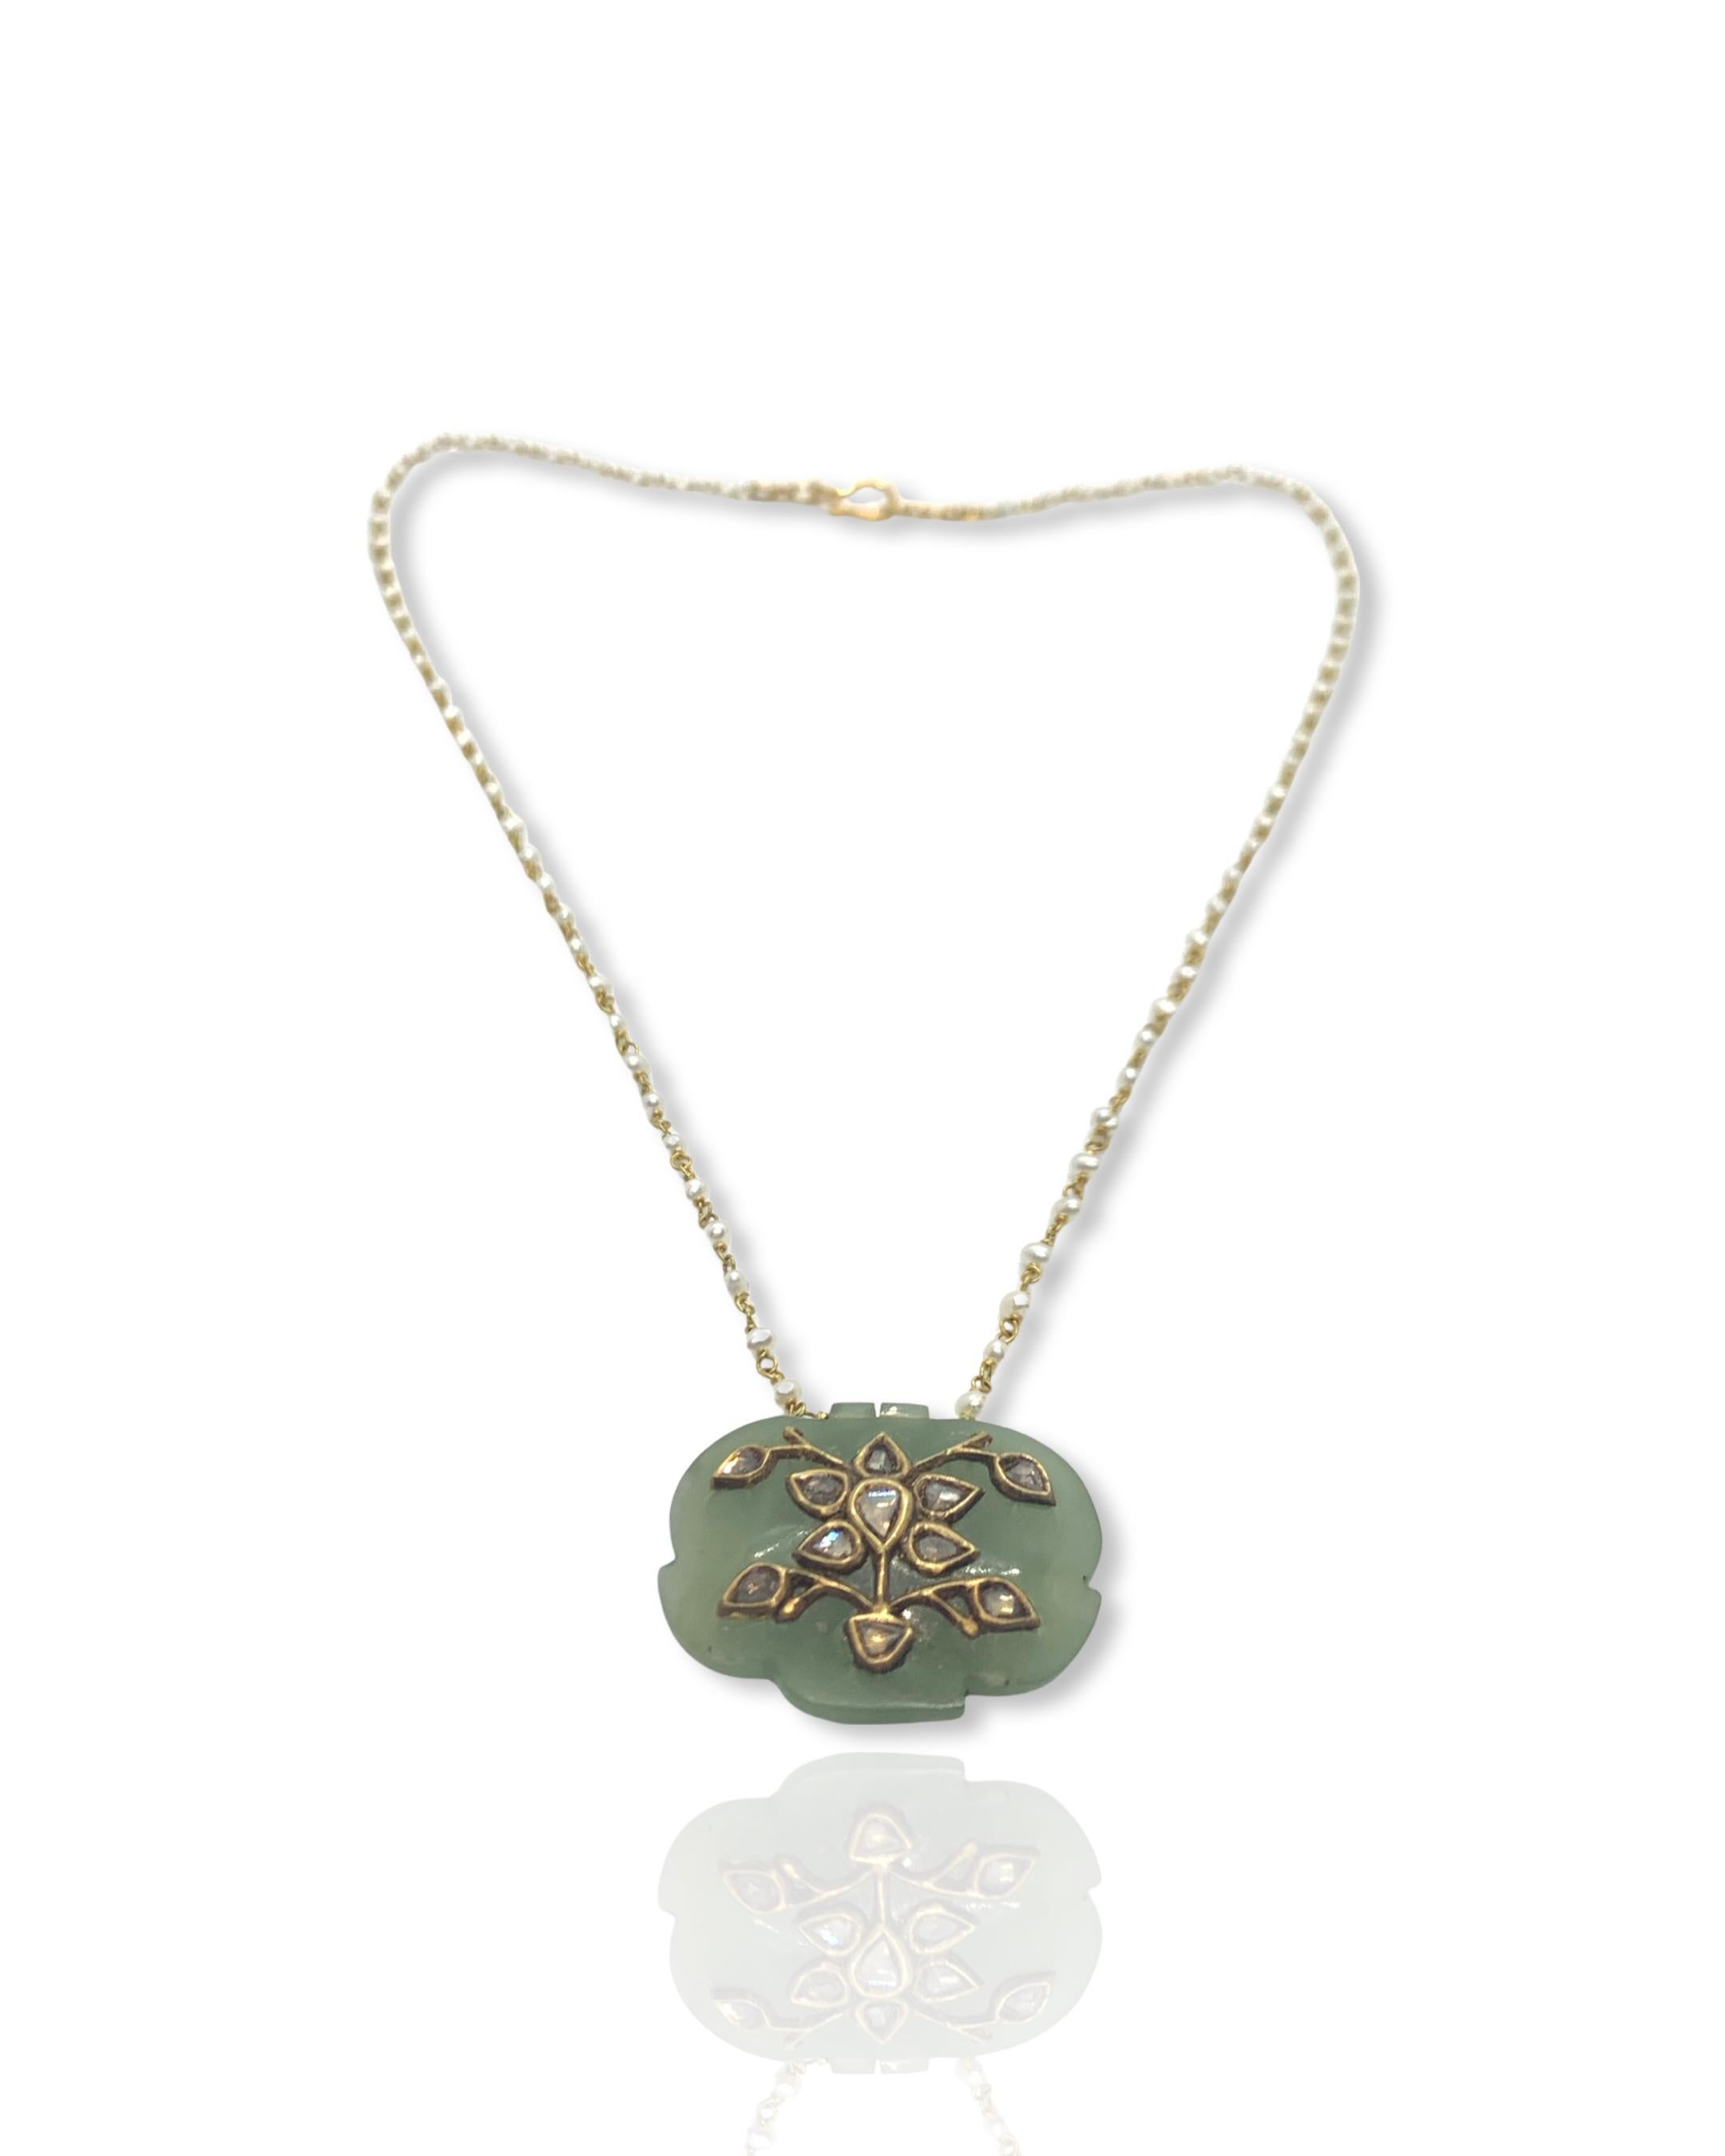 A beautiful jade pendant studded with diamonds strung in a chain of pearl beads.
The pearls are hand strung in 18K Gold and the necklace ends with a fish hook to make it easier for the wearer and secure at the same time. Such Jade pendants can be